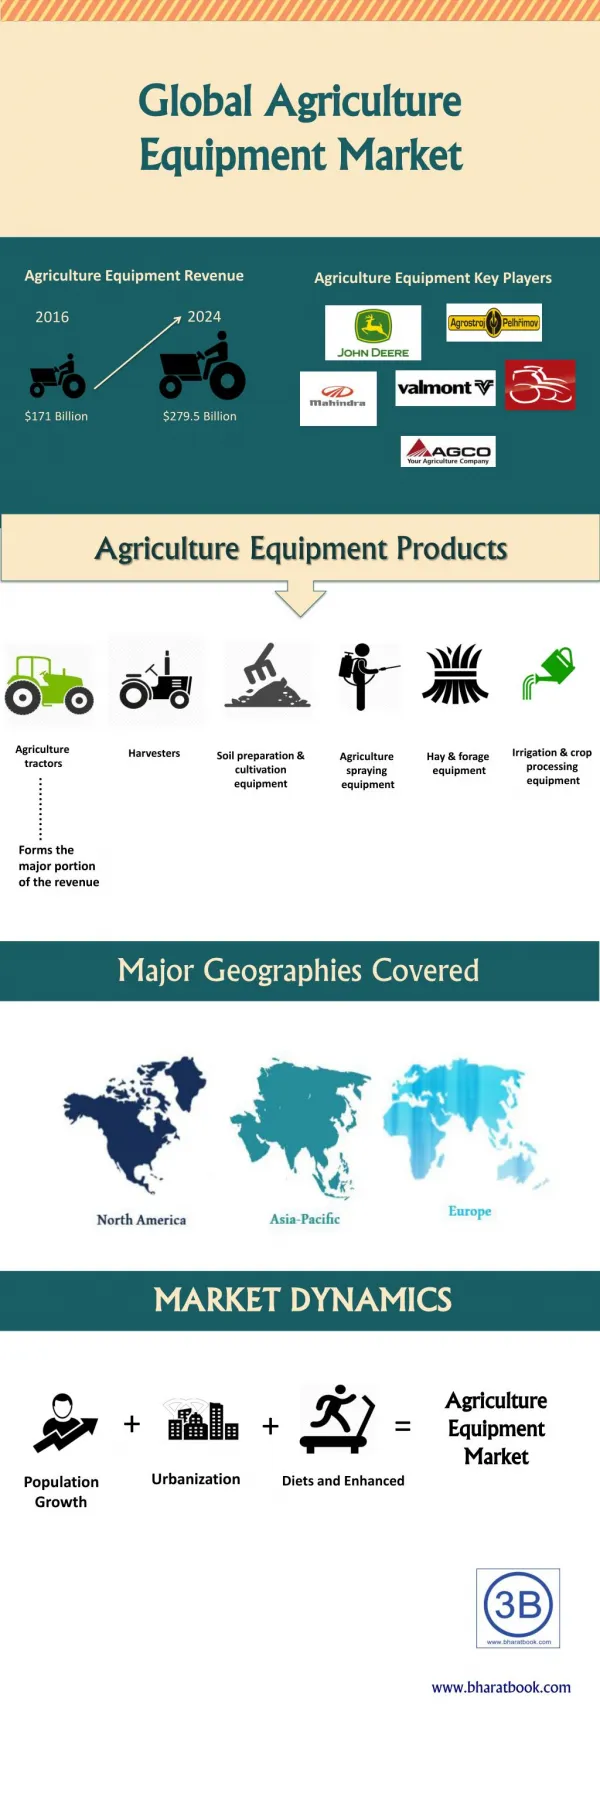 Global Agriculture Equipment Market by Product Type, Industry trends, Estimation & Forecast, 2016 - 2024